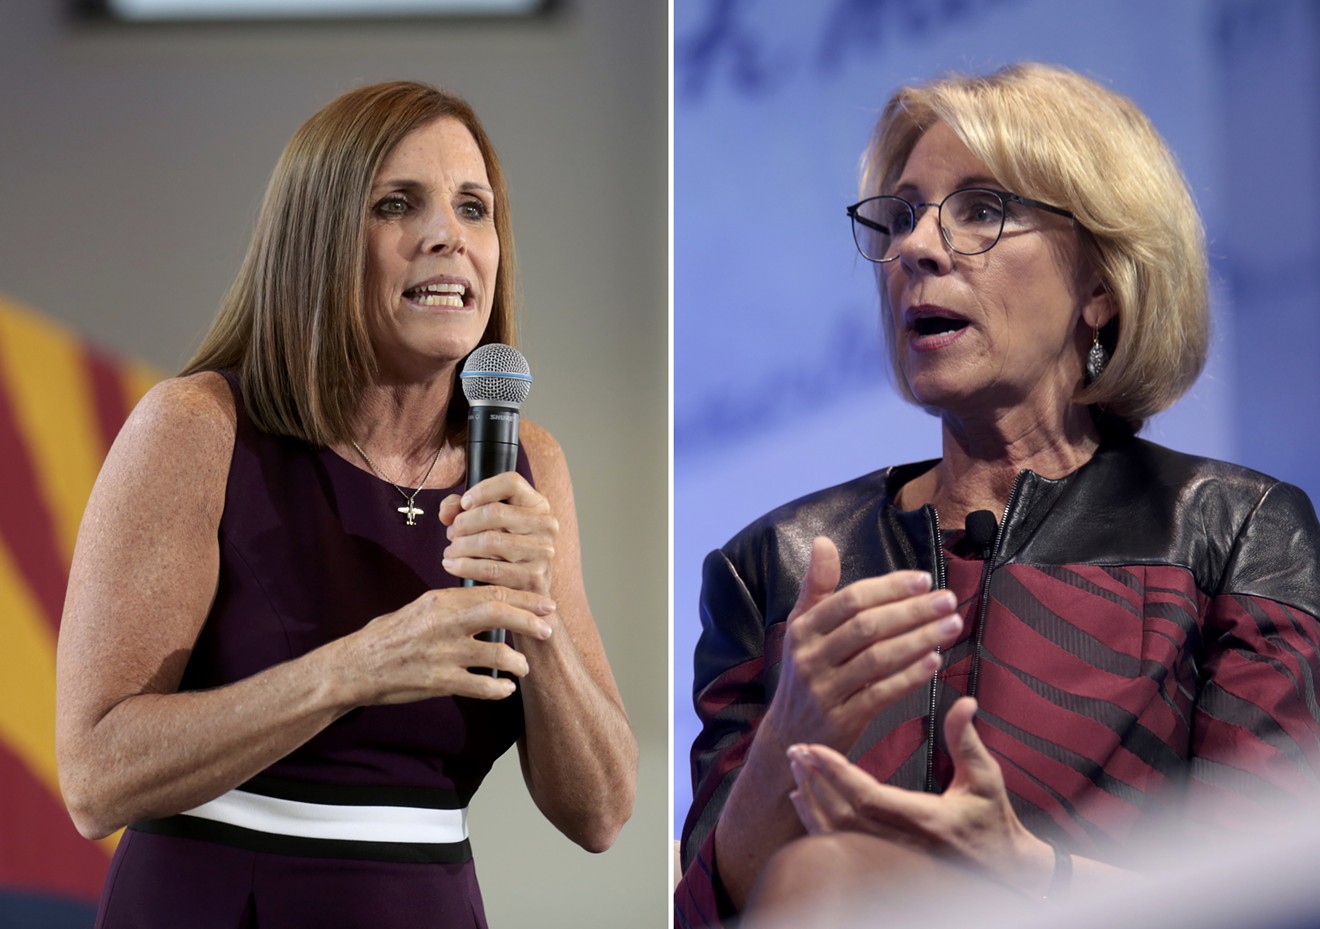 Left: Congresswoman Martha McSally campaigns for the Senate at an event in Gilbert earlier this month. Her campaign has received tens of thousands of dollars from the family of Education Secretary Betsy DeVos, according to a new report.